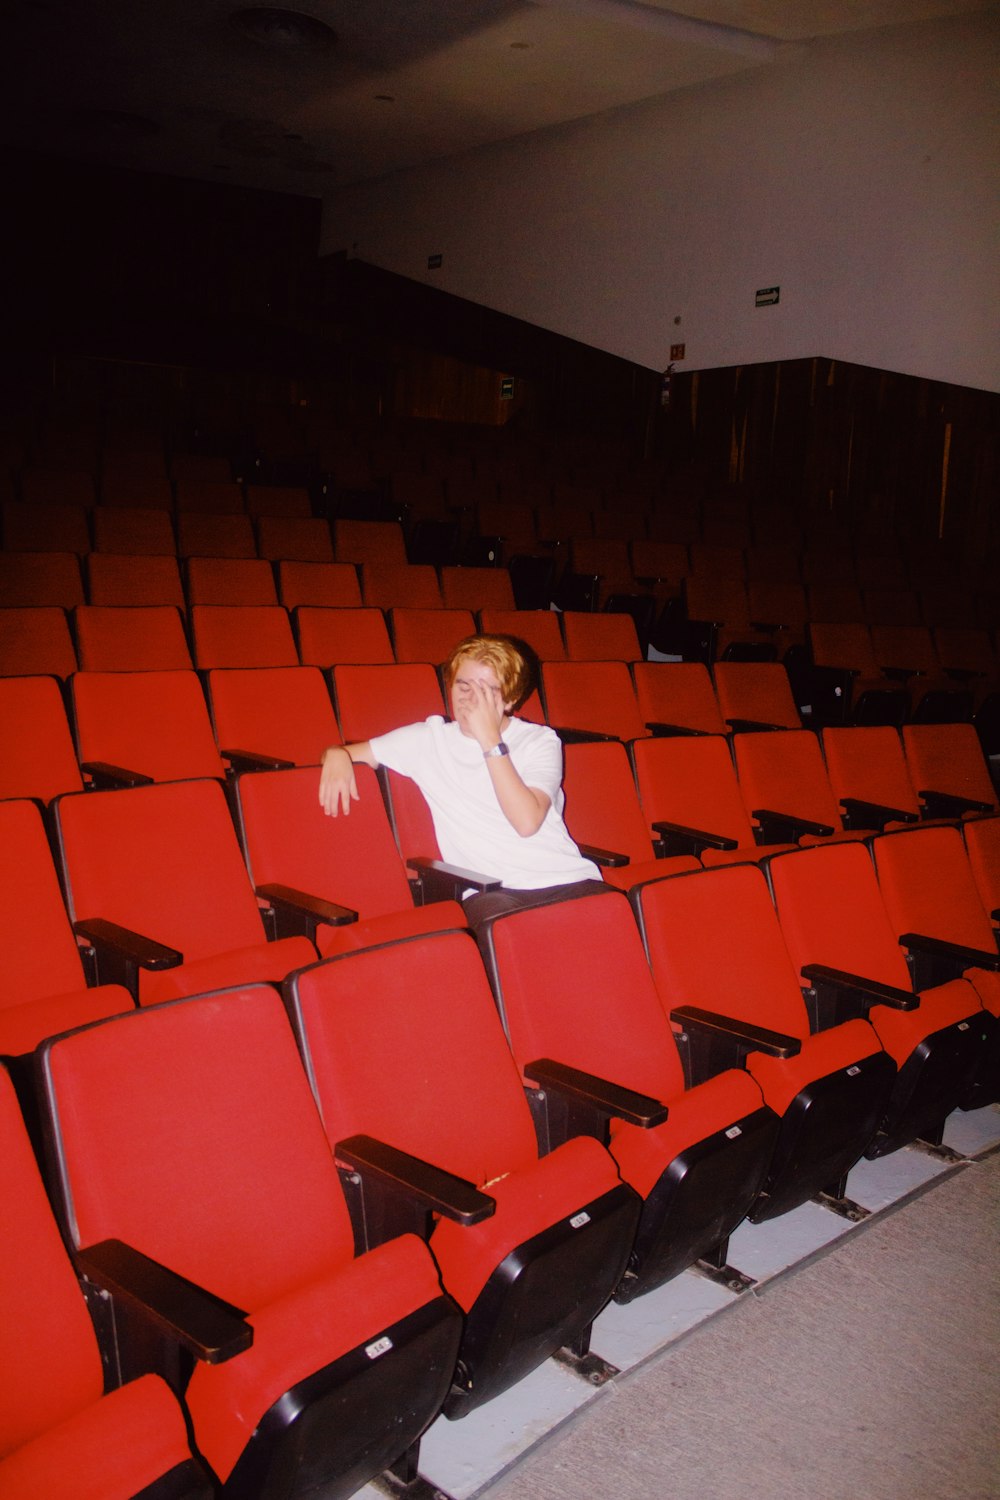 a woman sitting in a red chair in front of a row of red chairs